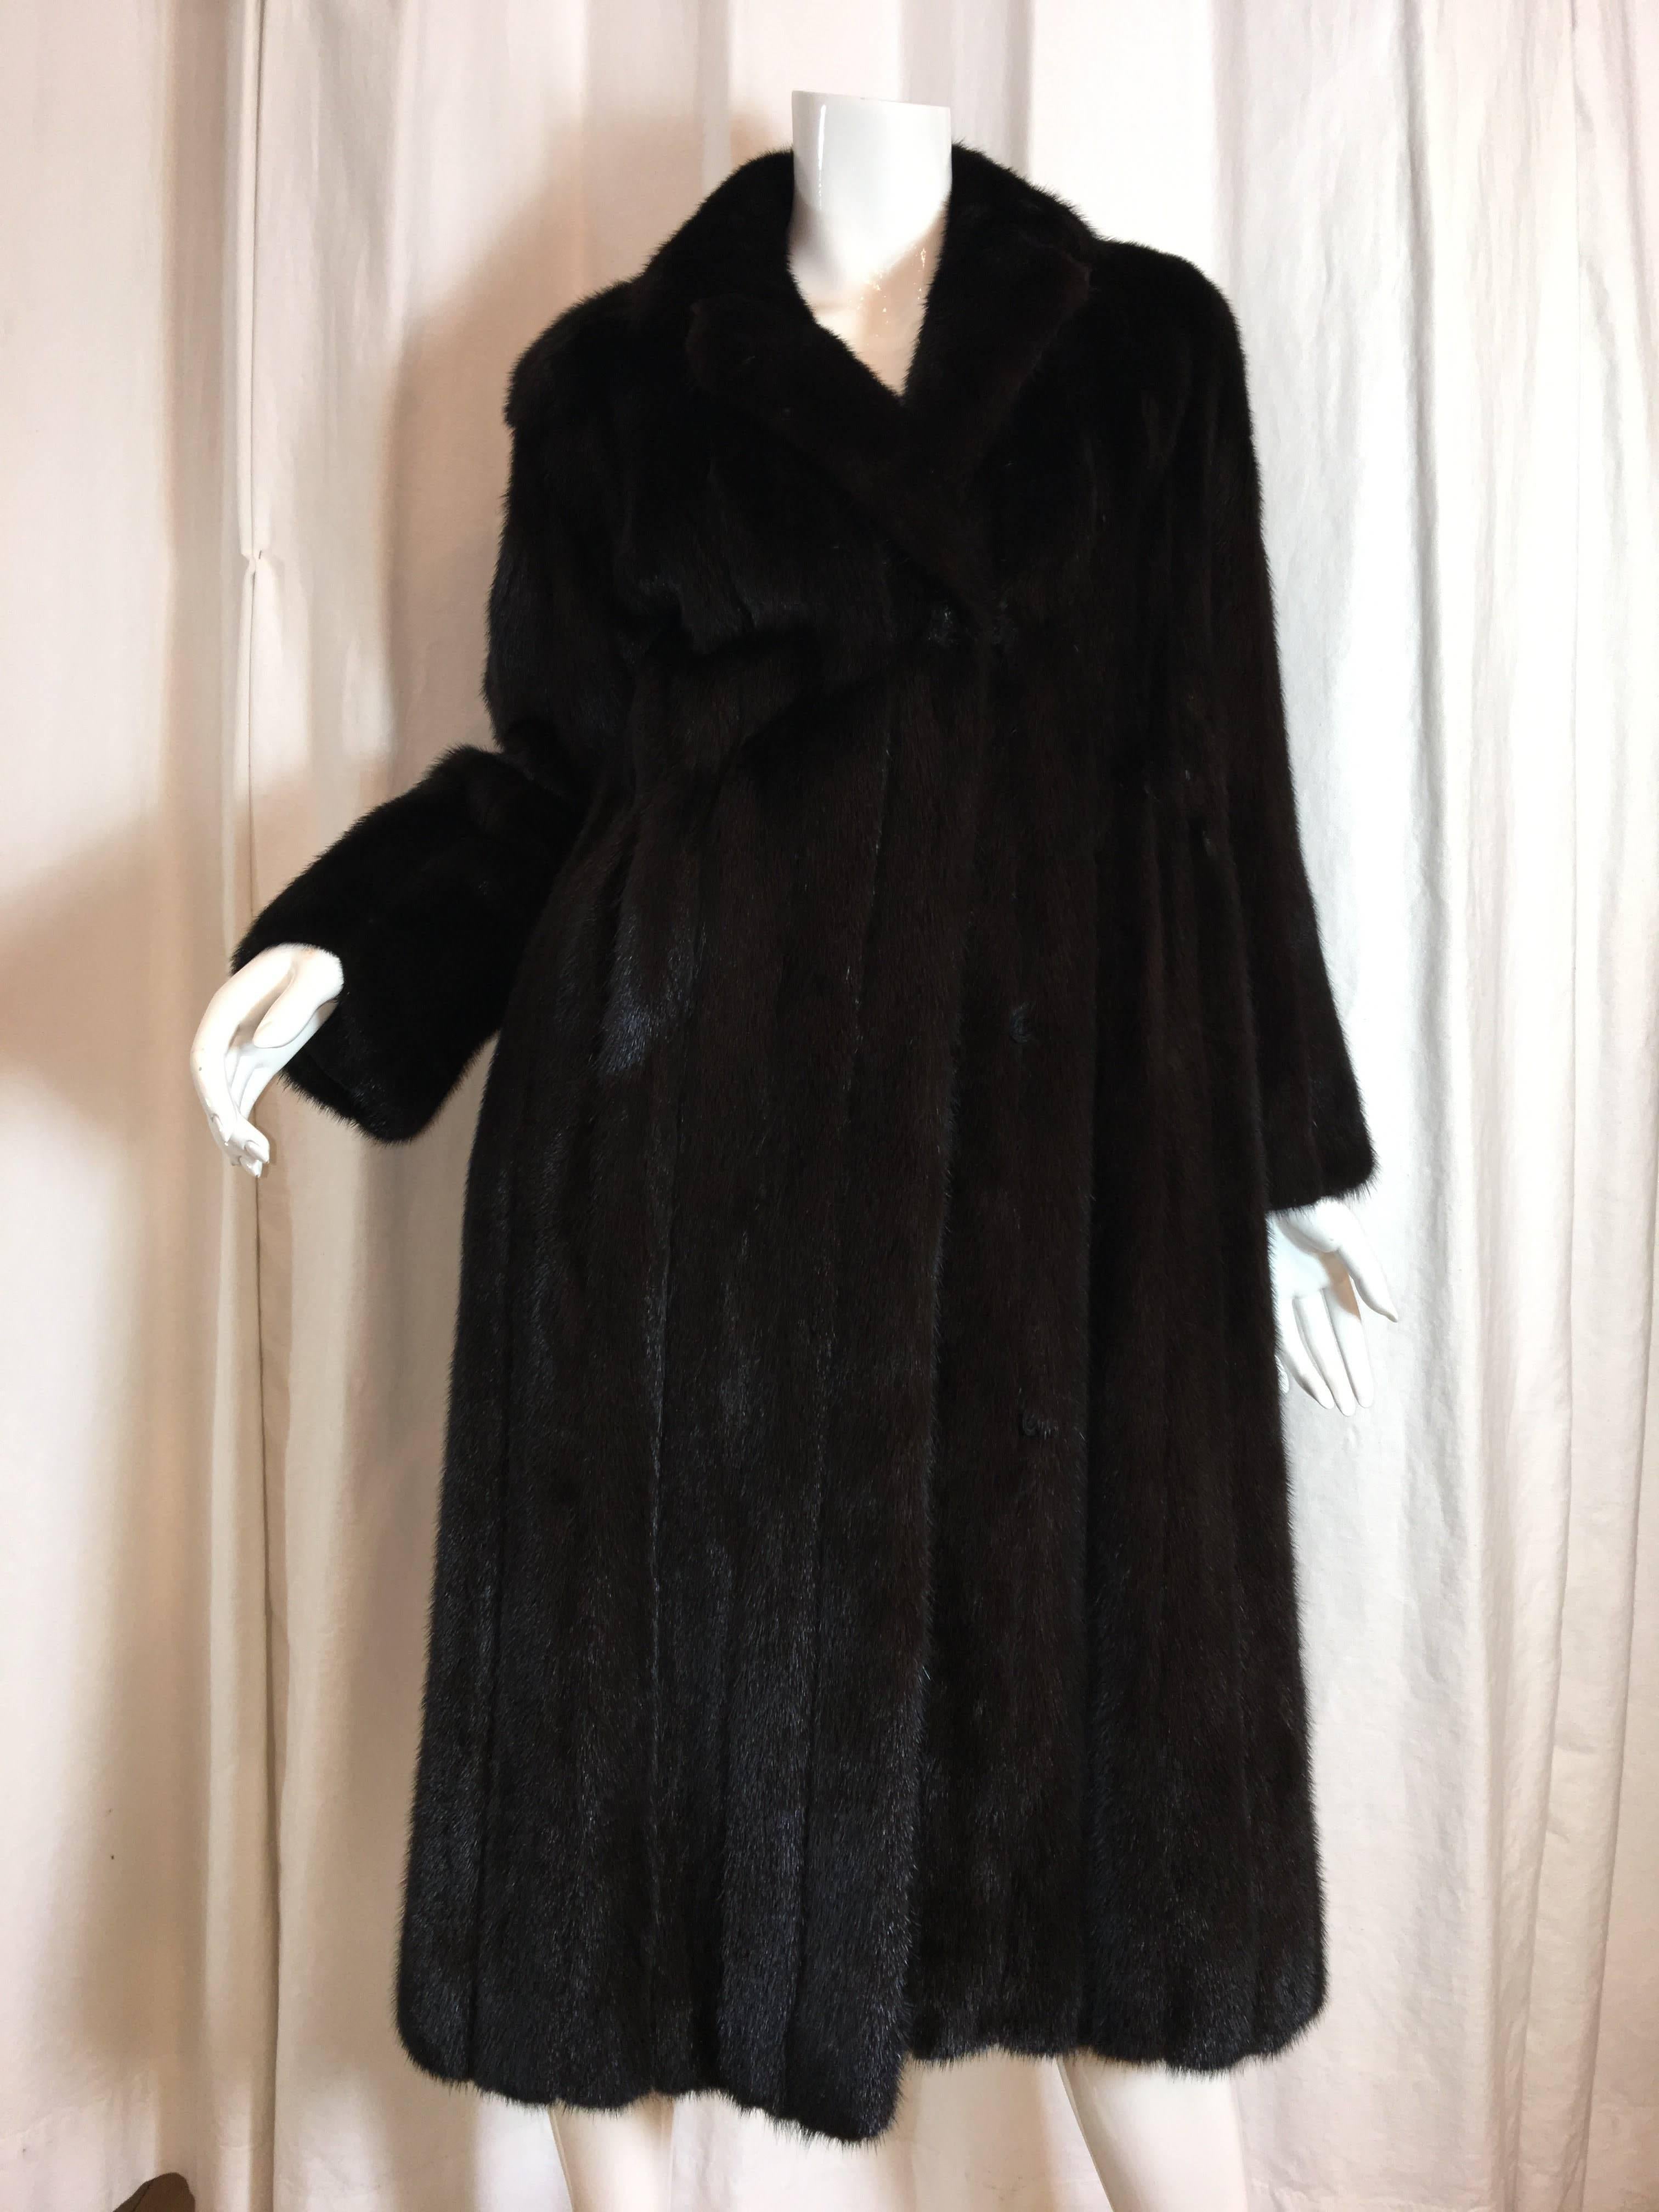 John Smedley Dark Brown MInk. Full length with Hook and Eye Closure, Pockets and Collar. 